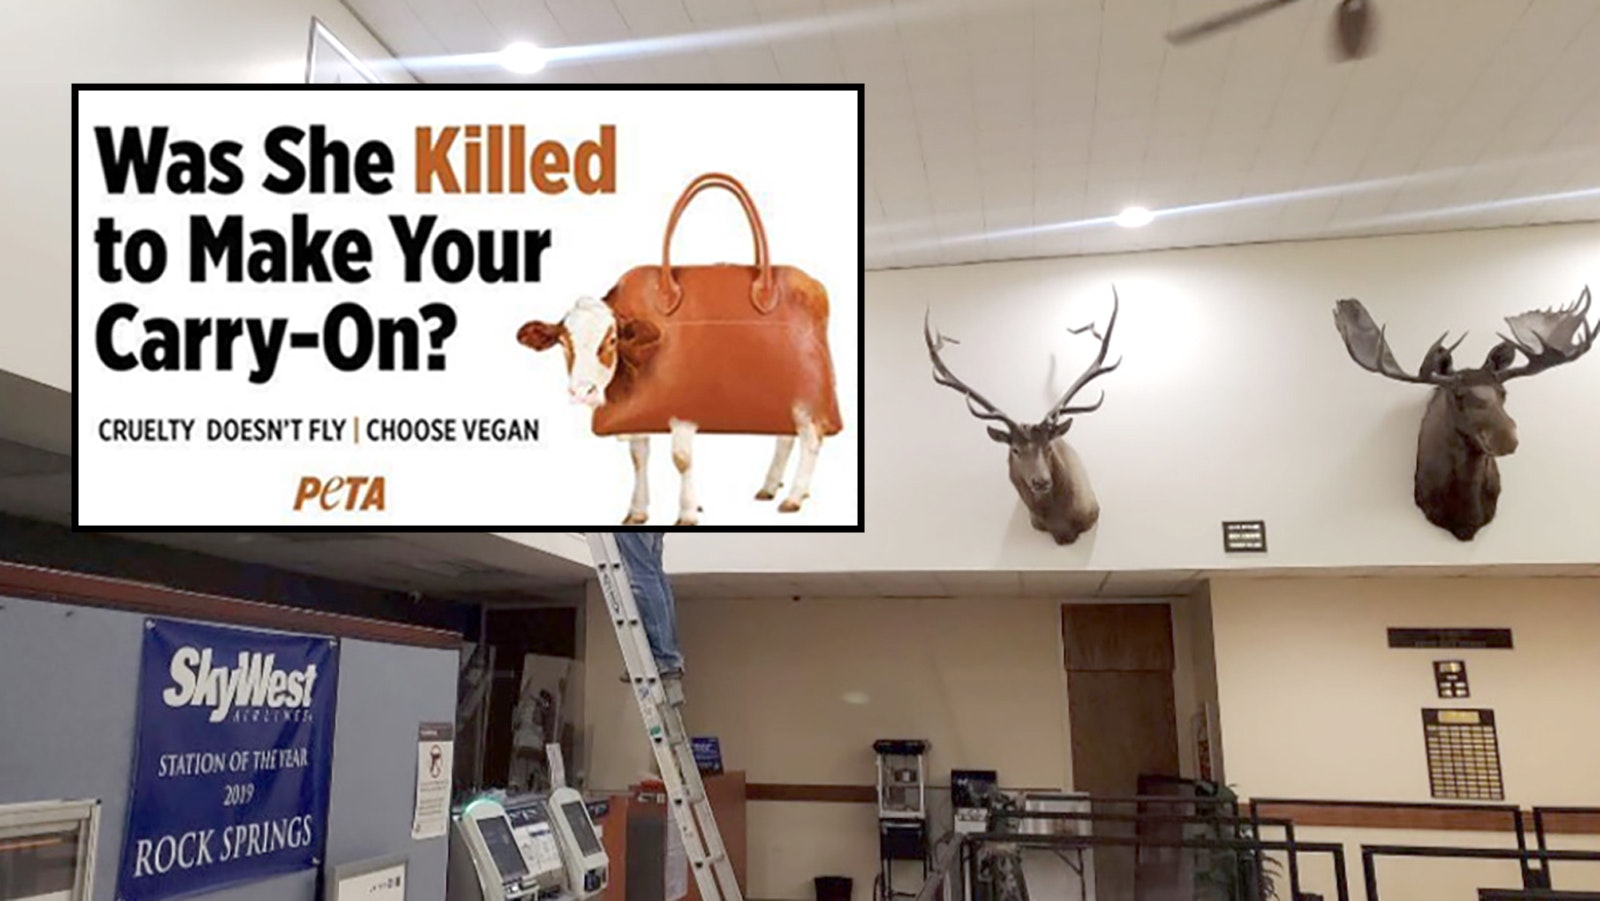 One argument PETA makes in its lawsuit over an ad denied by Southwest Wyoming Regional Airport is that the airport displays hunting trophies in its terminal and shows an alleged bias against PETA's views on animal cruelty.